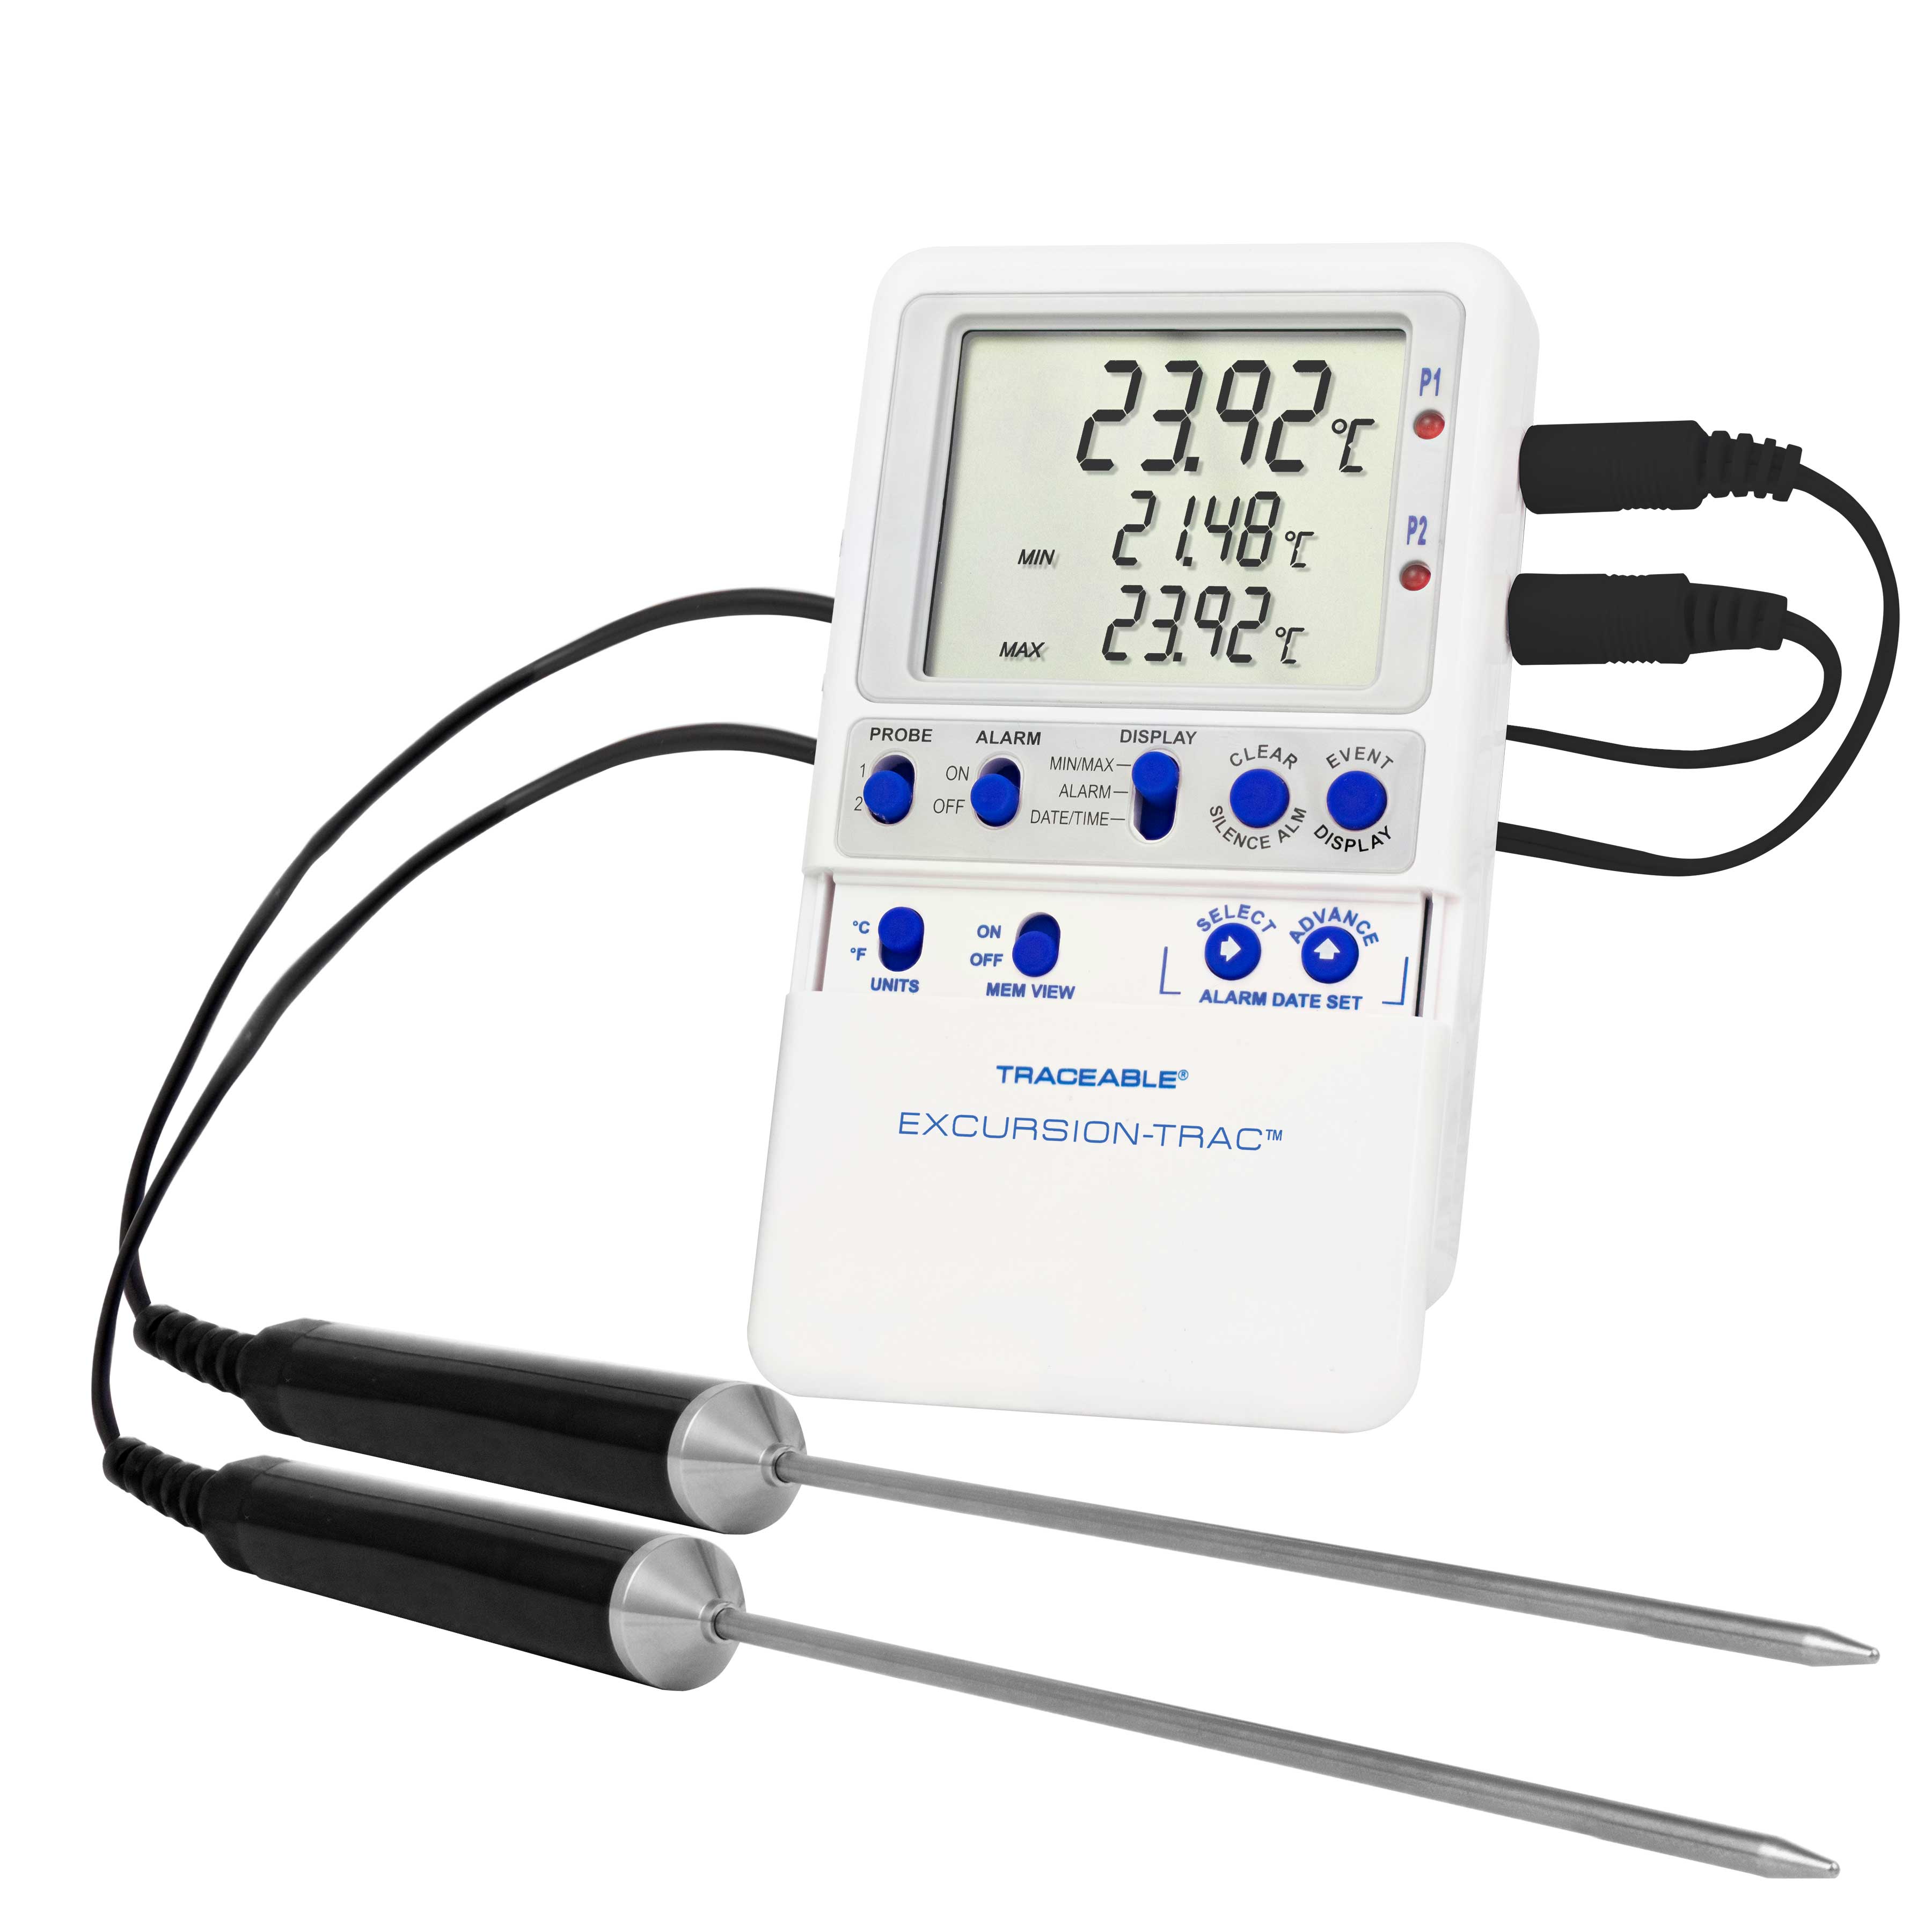 Excursion-Trac datalogging digital thermometer. TRACEABLE. Range: –50.00 to 70.00°C. Accuracy: ±0.25°C. Resolution: 0.01°C. Probes: 2 stainless-steel probes. Application: Refrigerators and Freezers